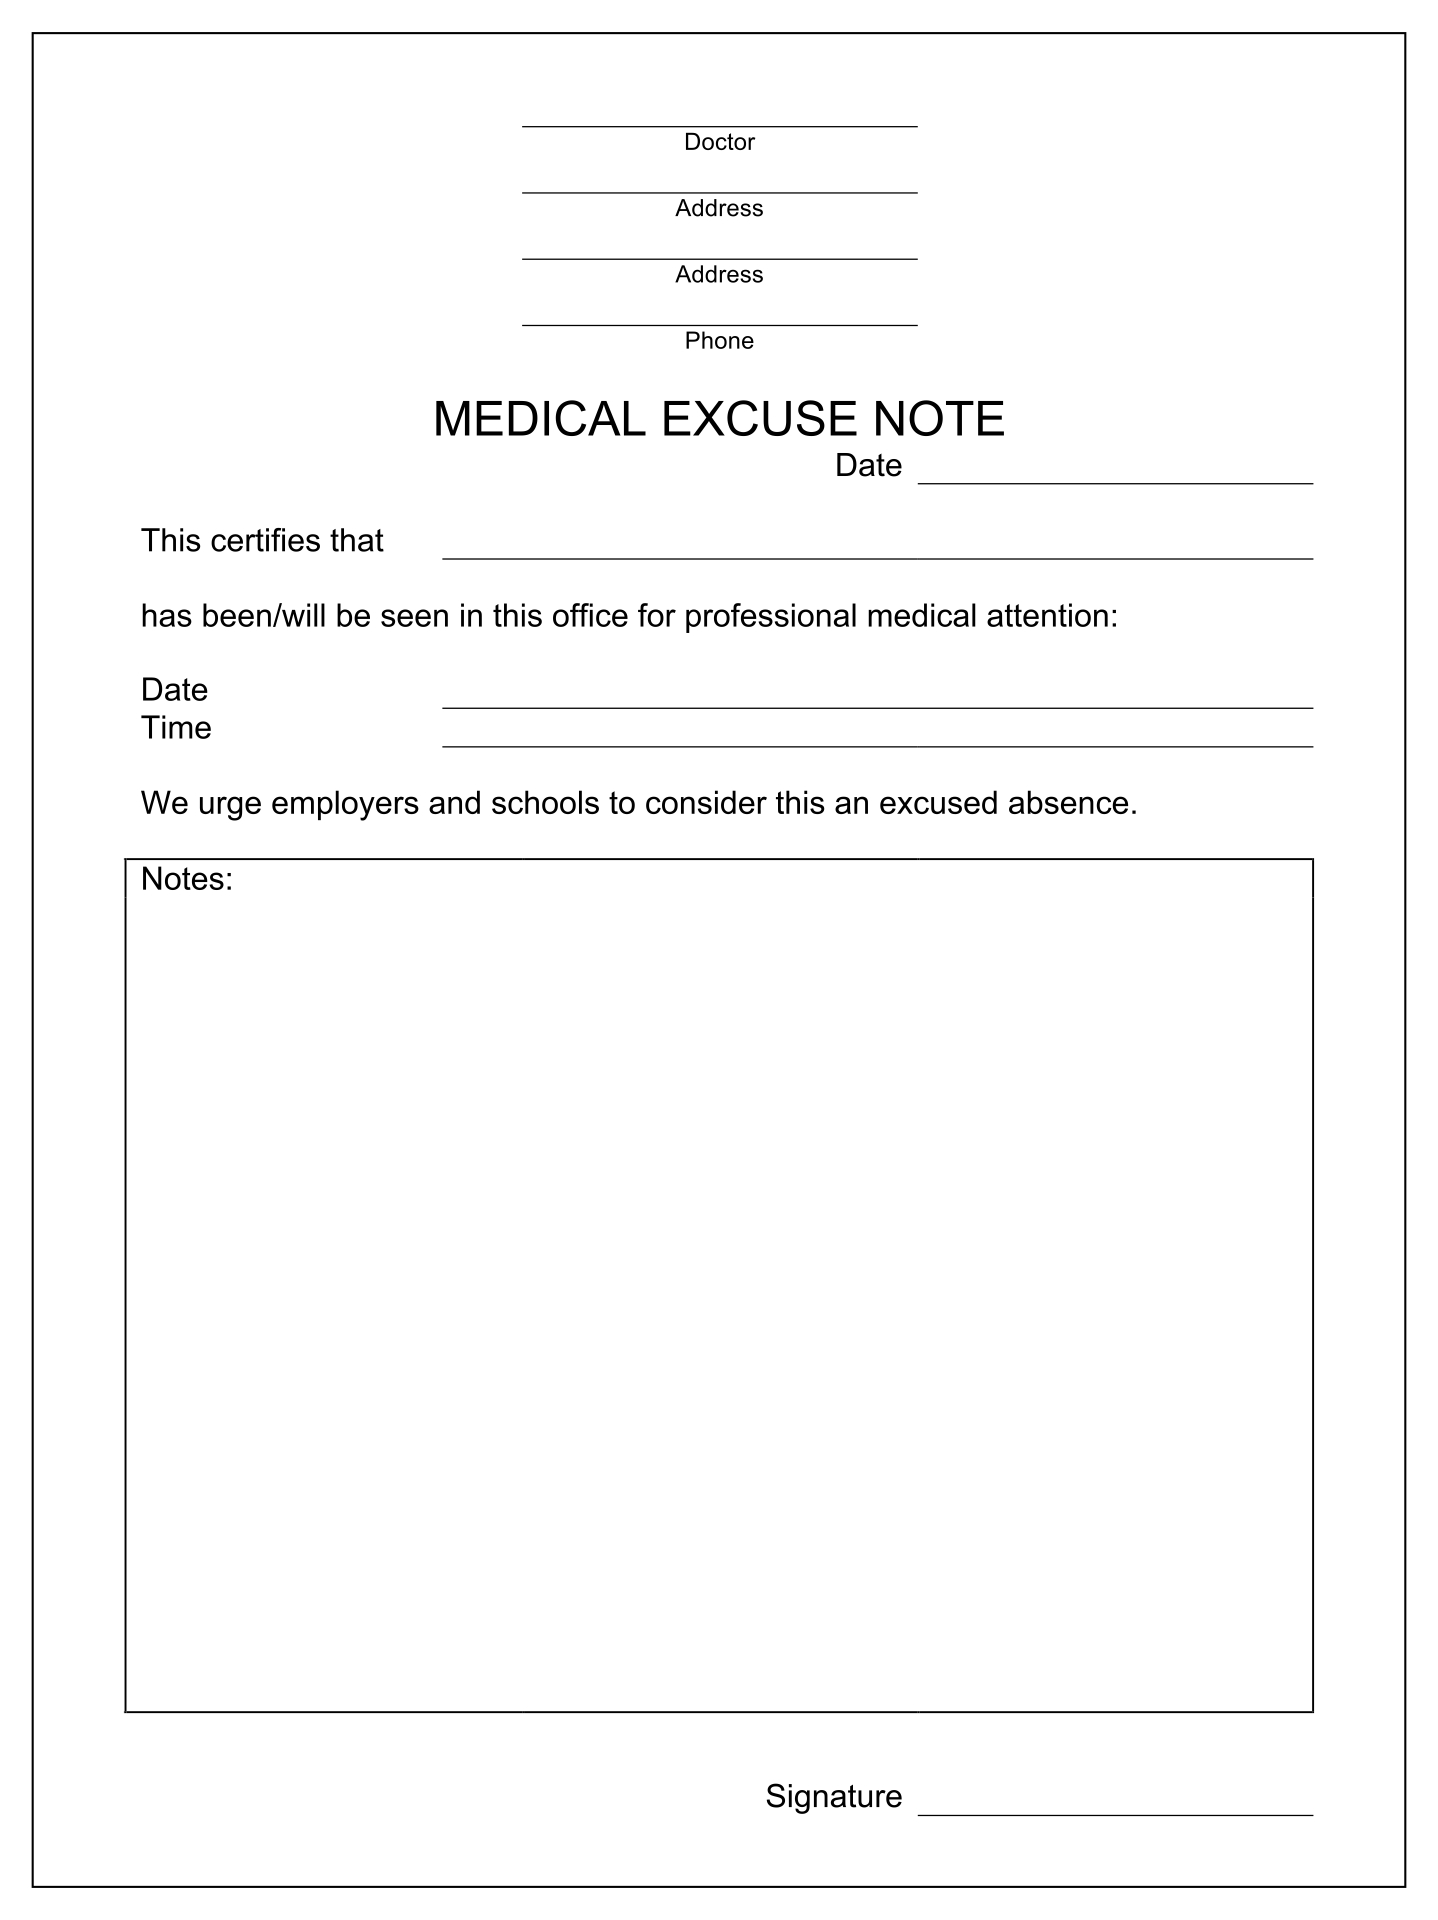 21 Best Return To School Notes Printable - printablee.com For Hospital Note Template